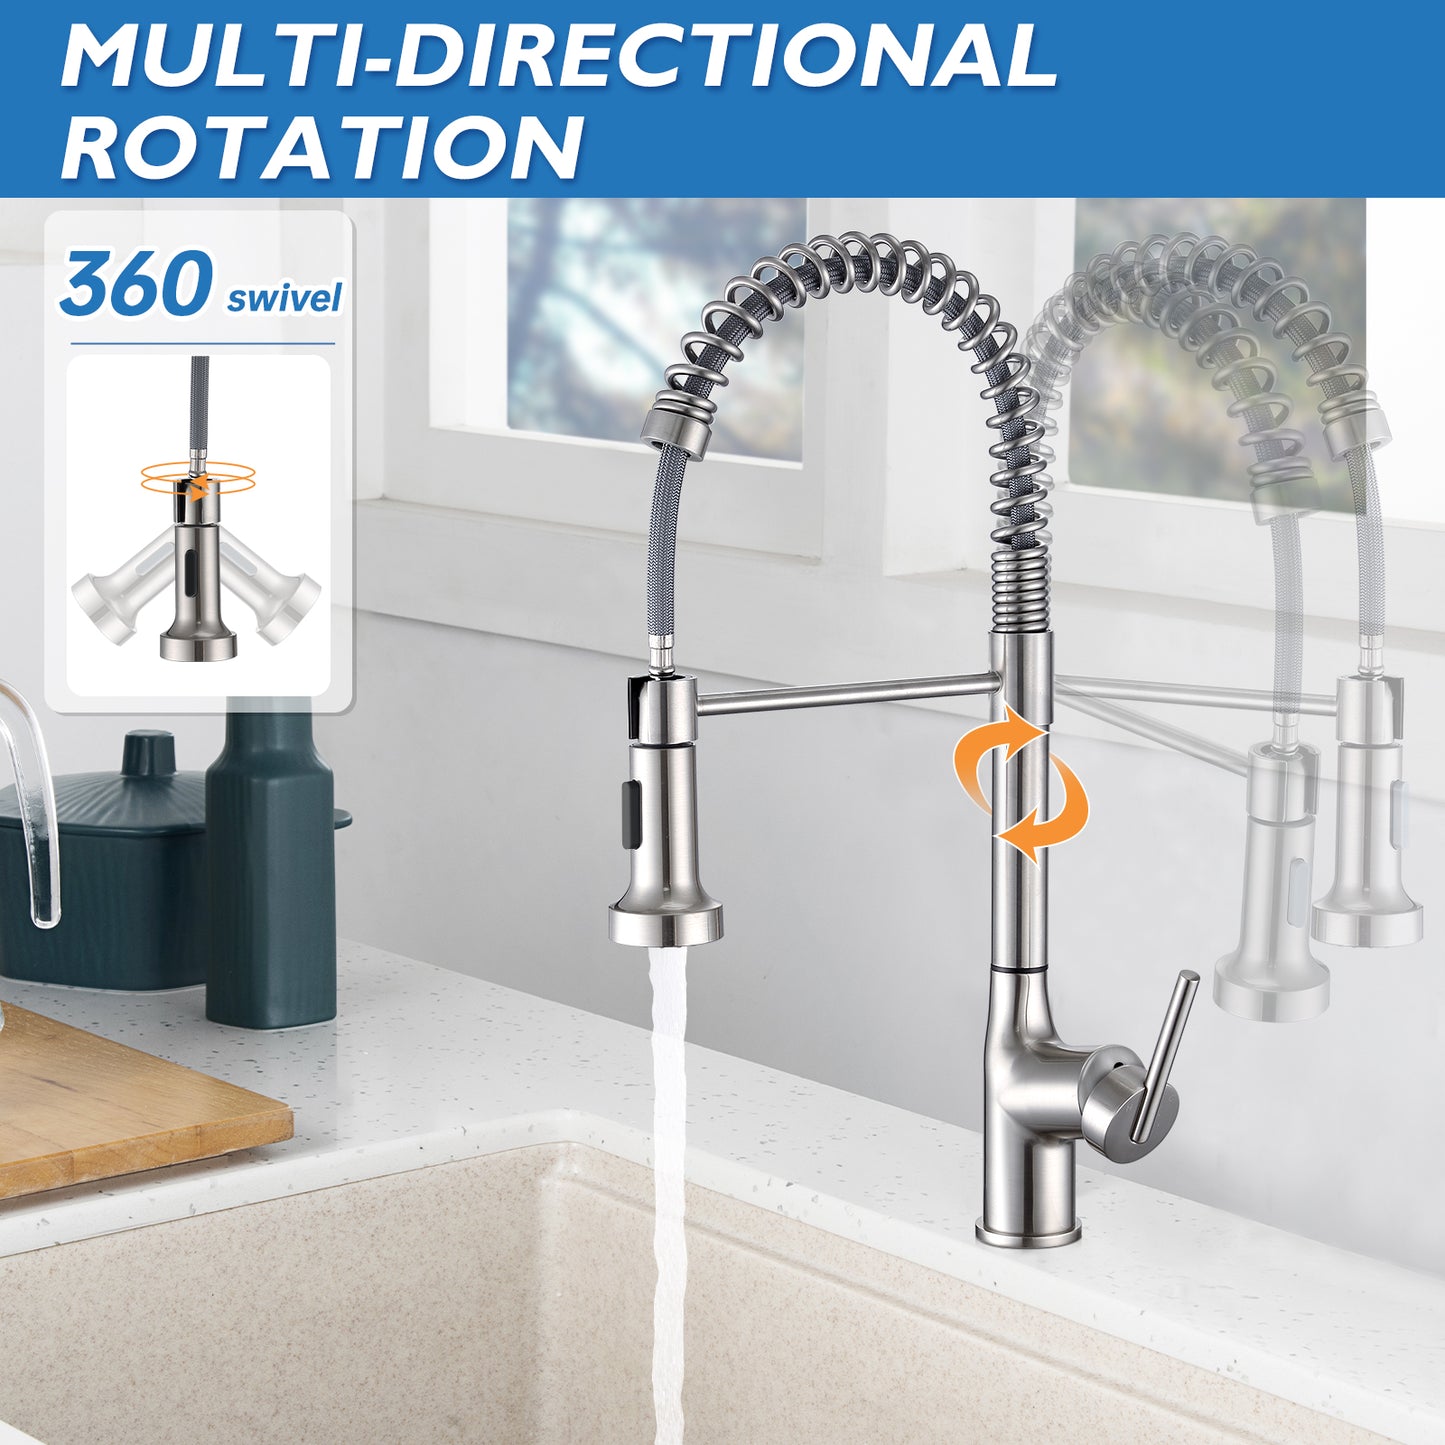 CF-15011 pull down kitchen faucet